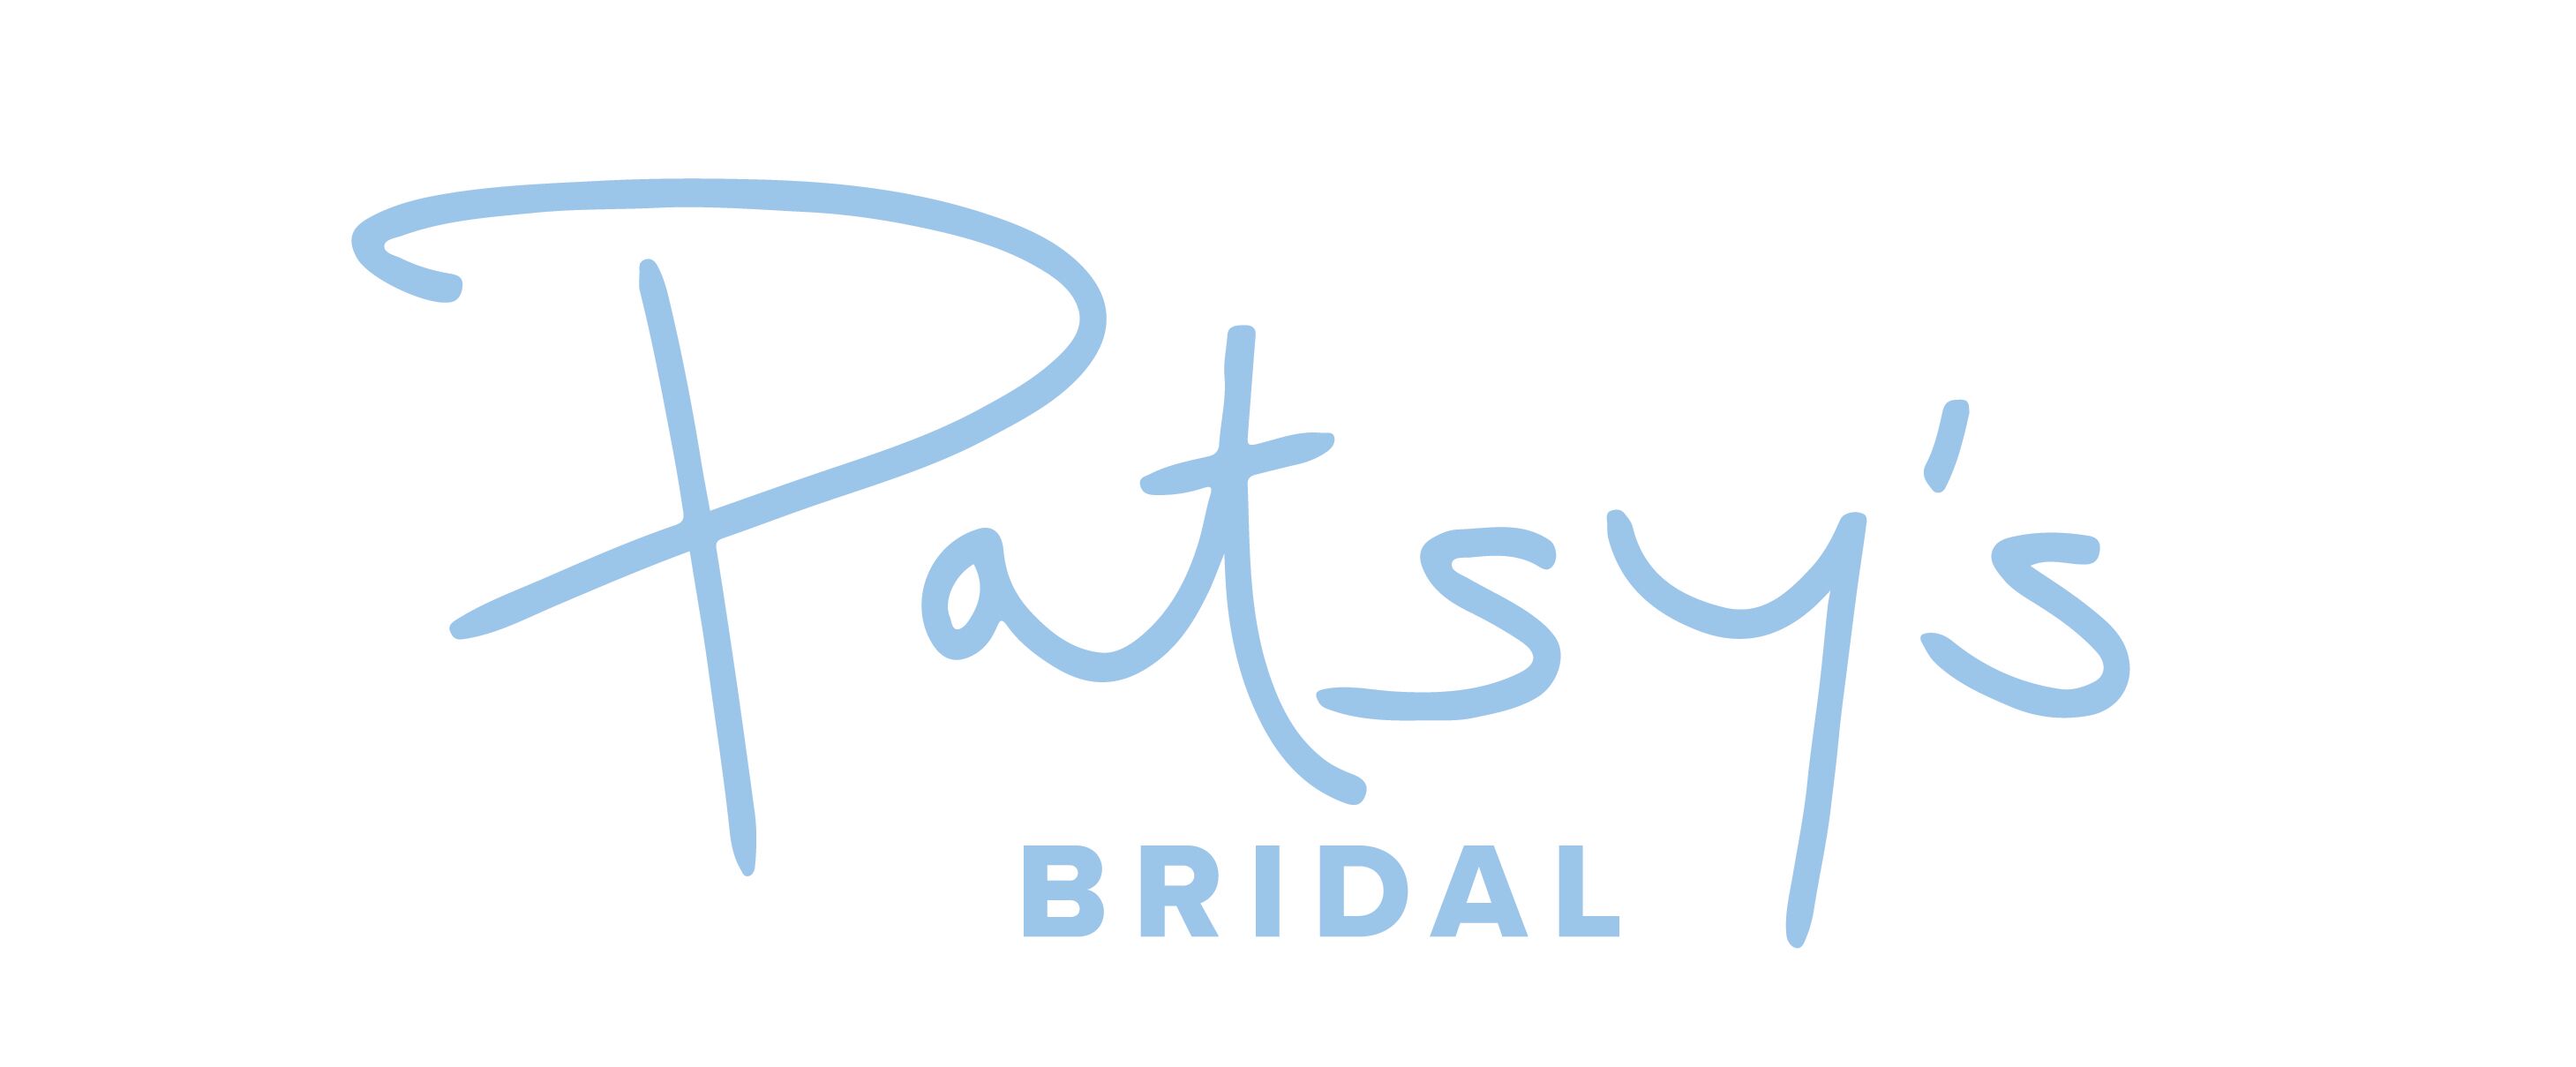 Patsy’s Bridal Boutique | Bridal Salons - The Knot